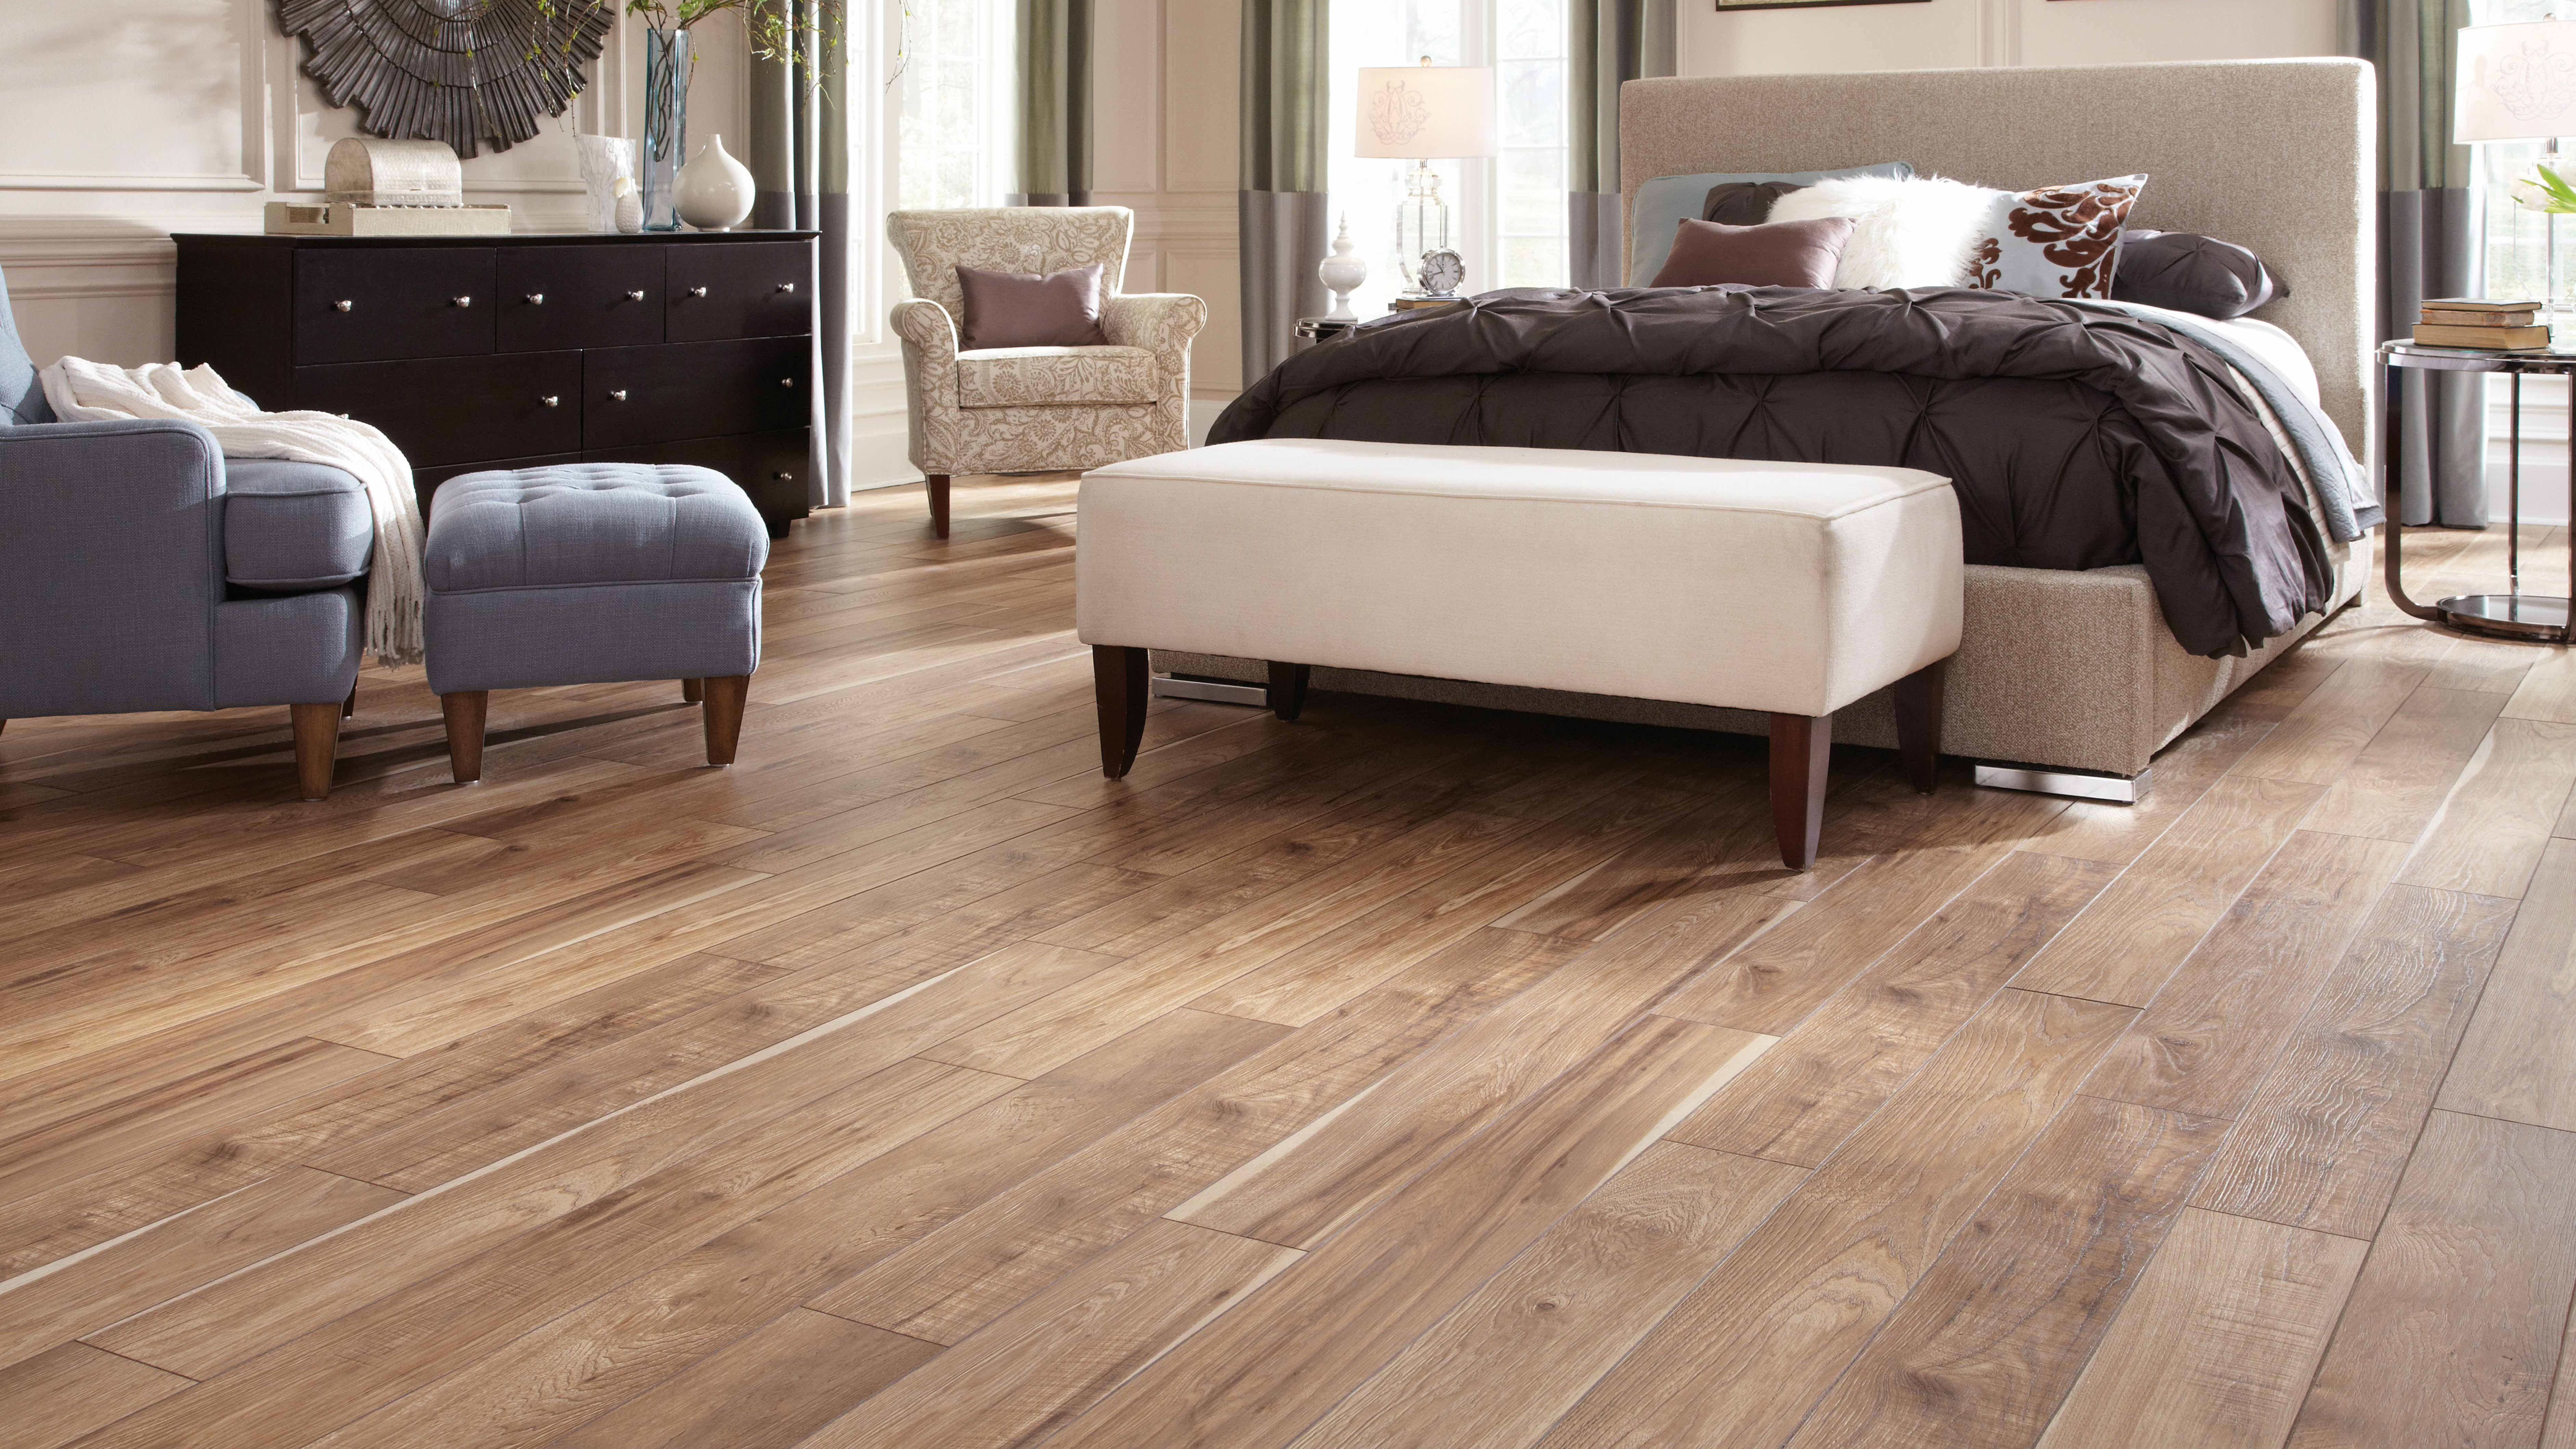 Bedroom scene with laminate wood-look flooring, arm chair, queen sized bed.